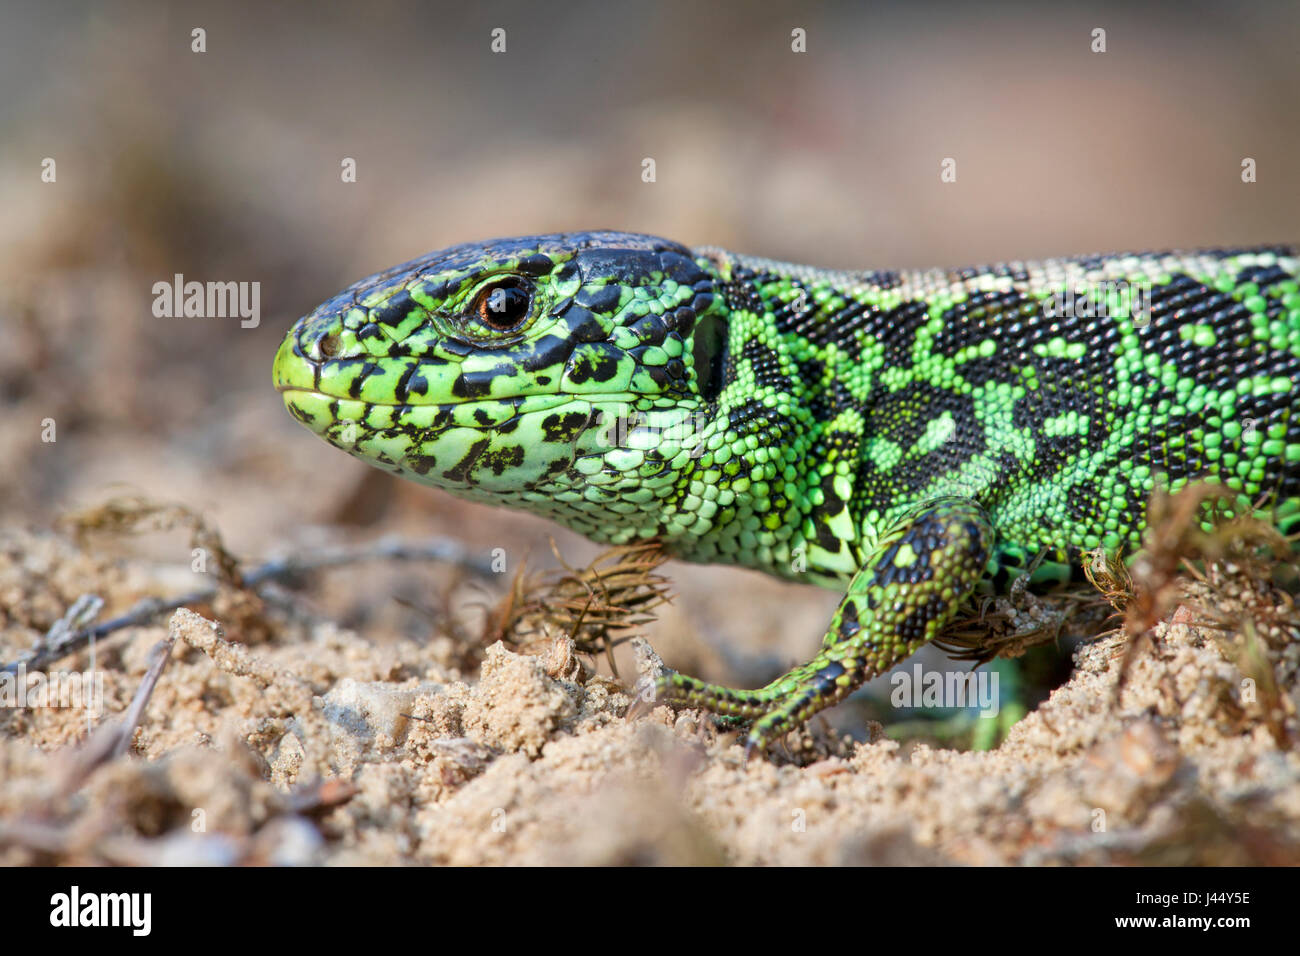 potrait of a green male sand lizard on sand Stock Photo